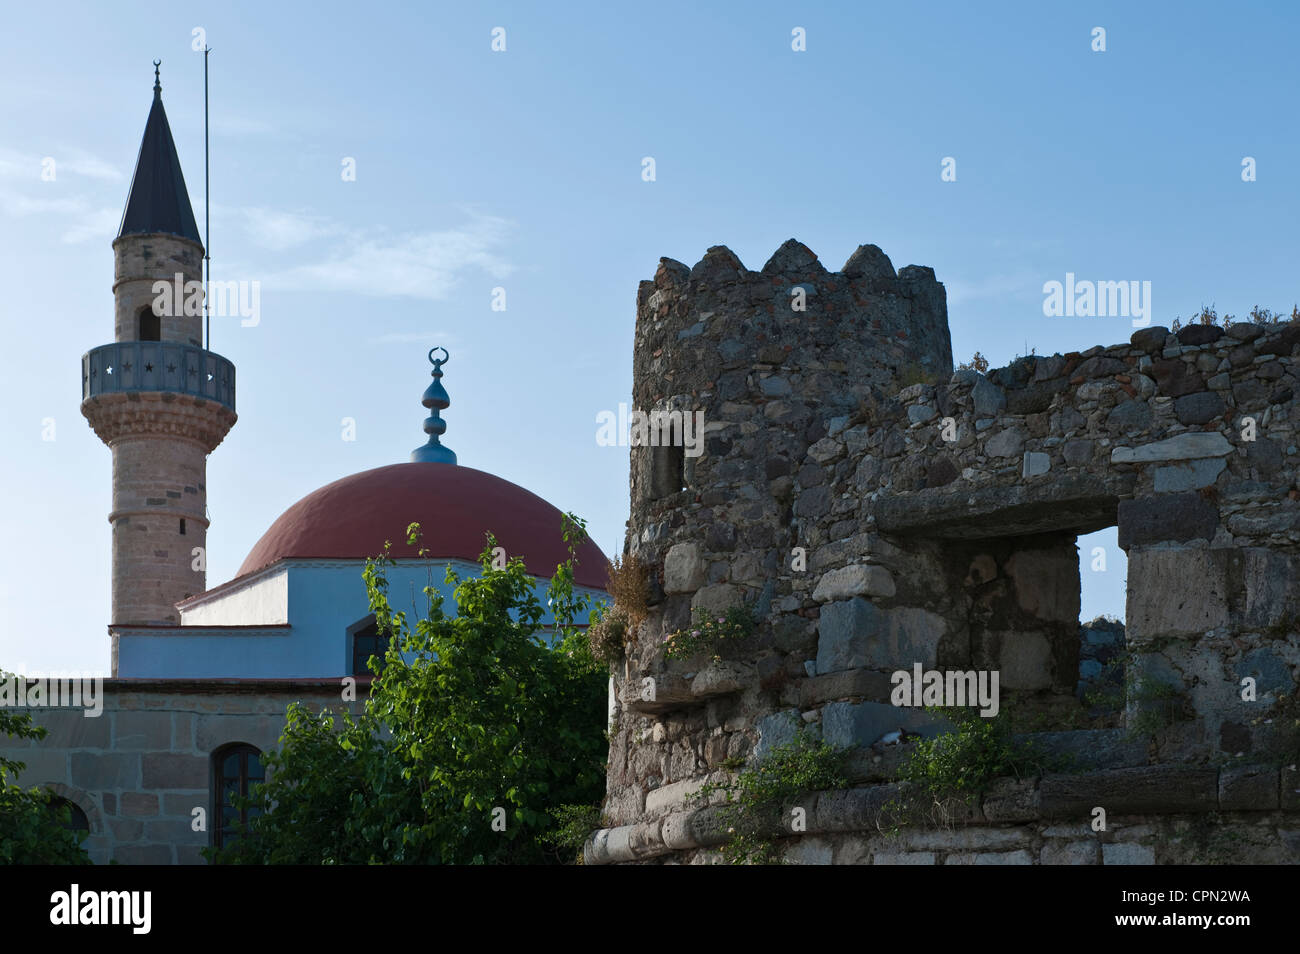 Greece, Dodecanese, Kos, the Defderdar Mosque in Eleftheria square and medieval walls Stock Photo